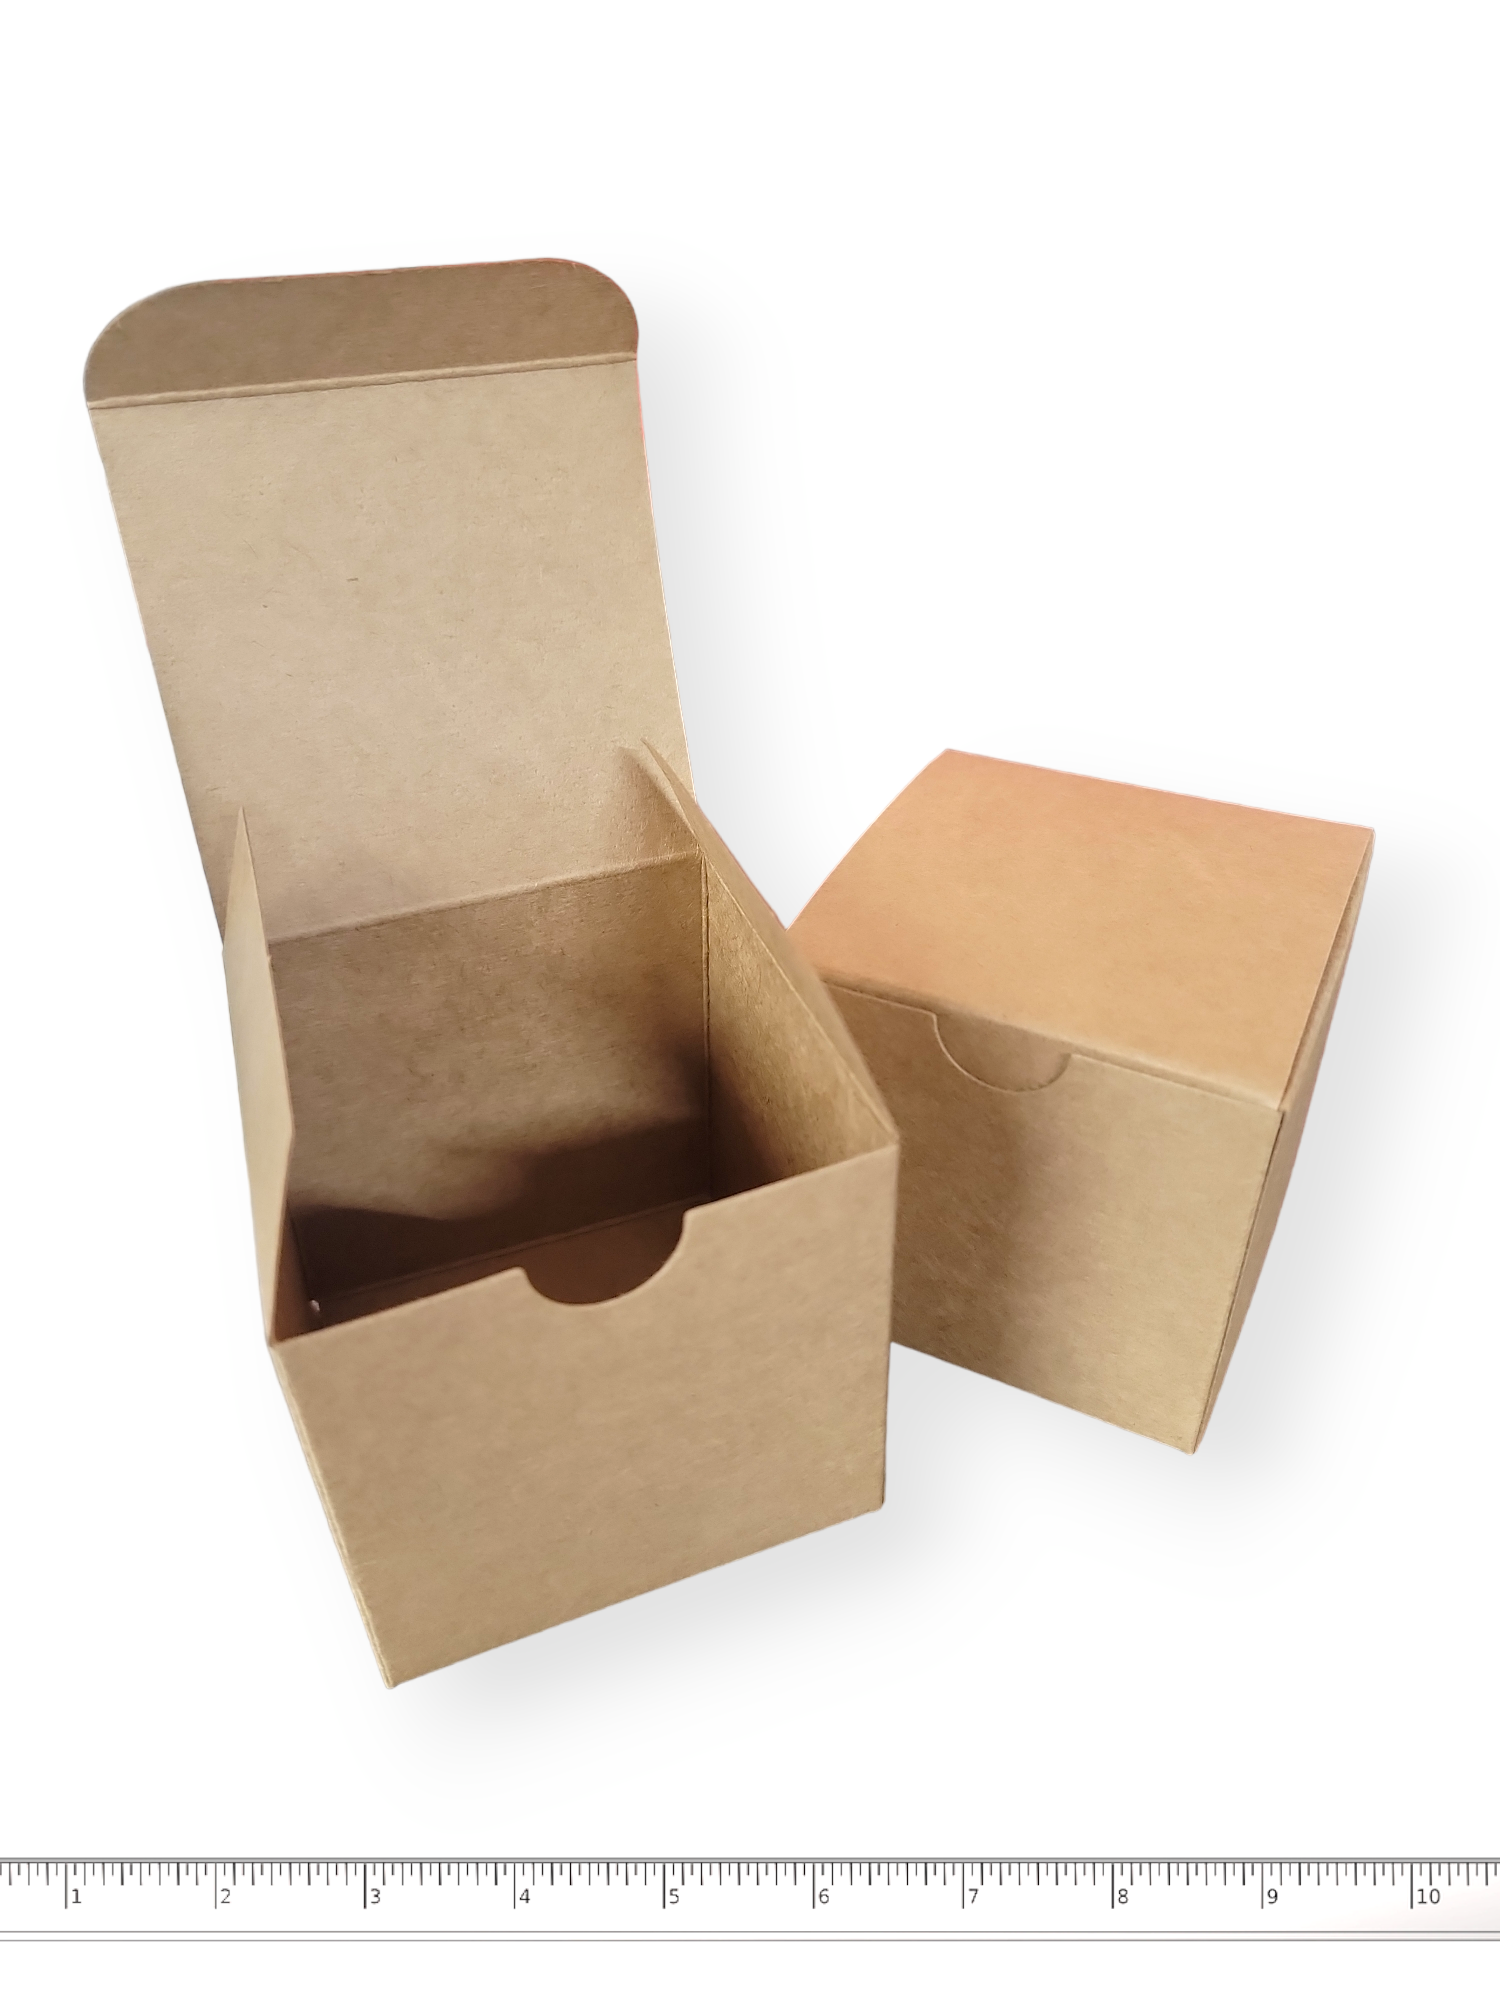 3" Cube Foraging Boxes - 5 Pack